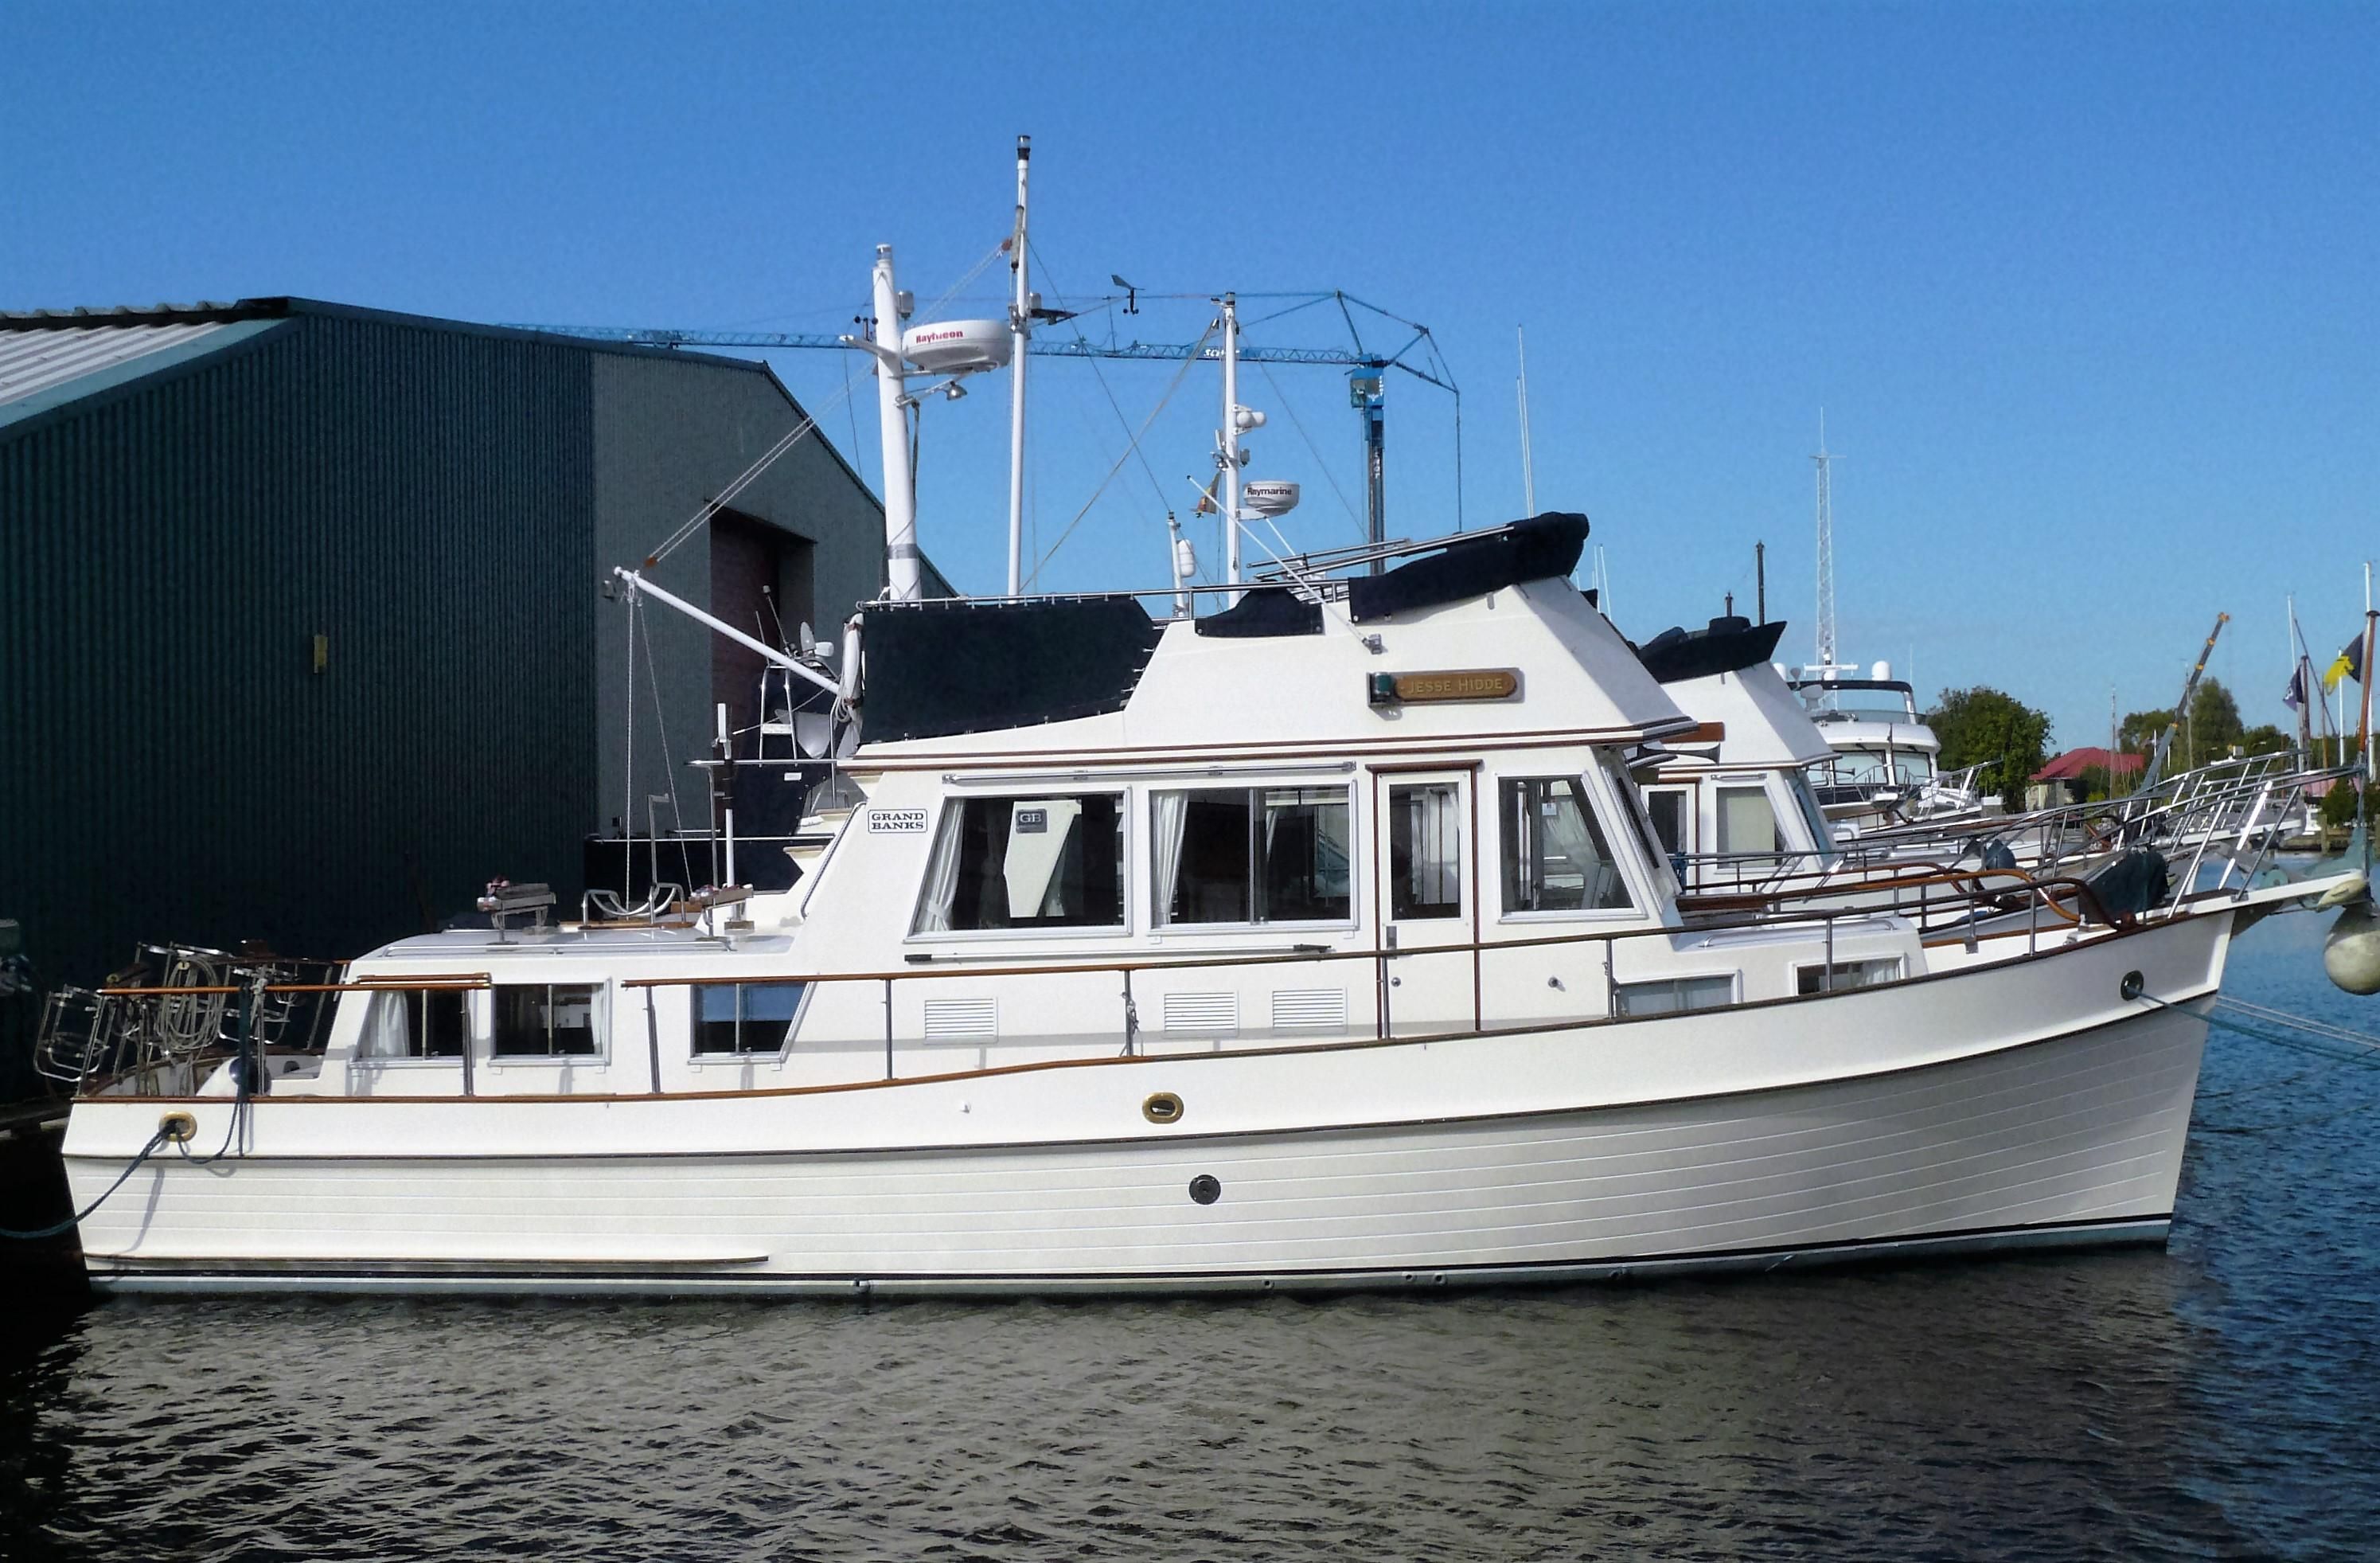 36 ft yachts for sale uk